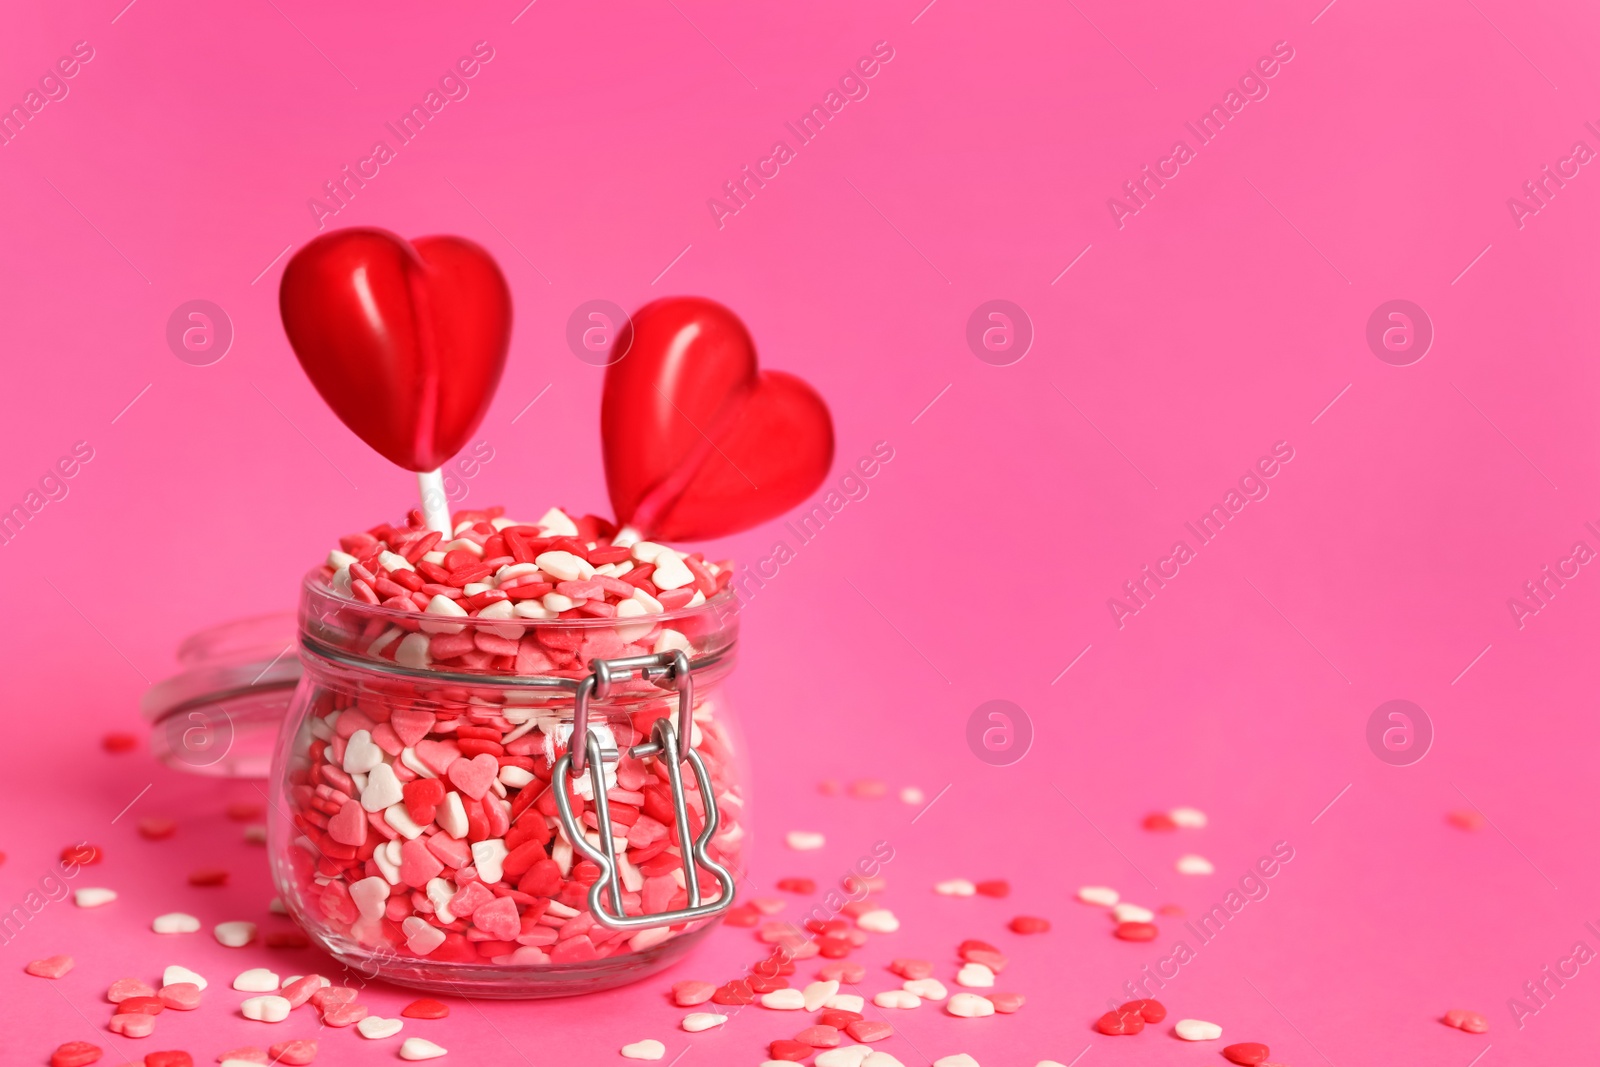 Photo of Sweet heart shaped lollipops and sprinkles in glass jar on pink background, space for text. Valentine's day celebration